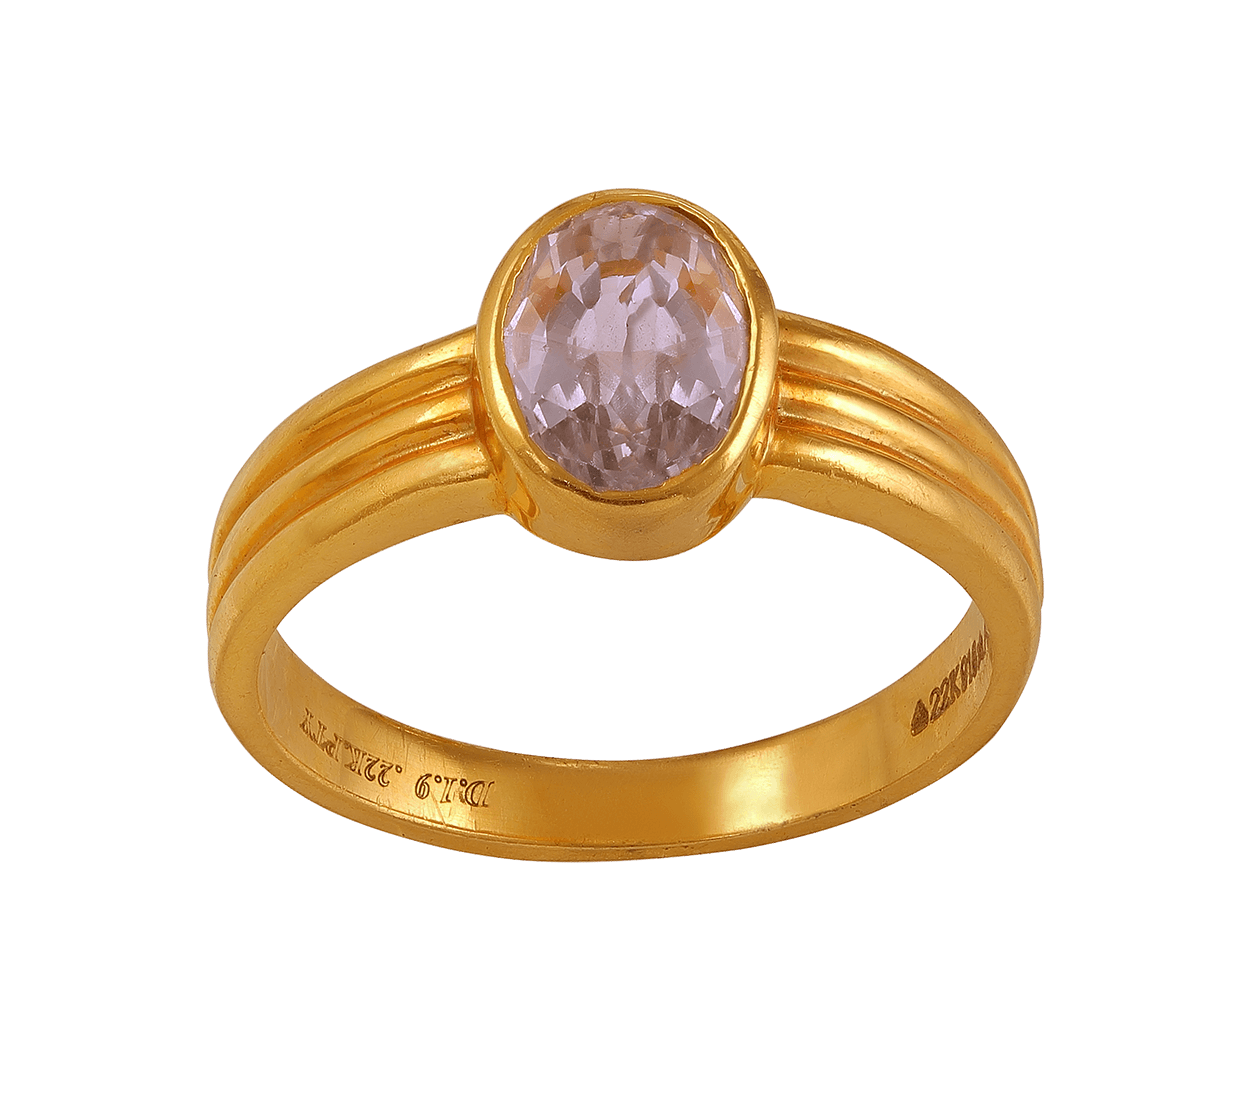 Modern Design With Pink Stone Man Ring On 14K Yellow Gold. – Chic Jewelry  Los Angeles, Importers and Wholesalers of Fine Jewelry